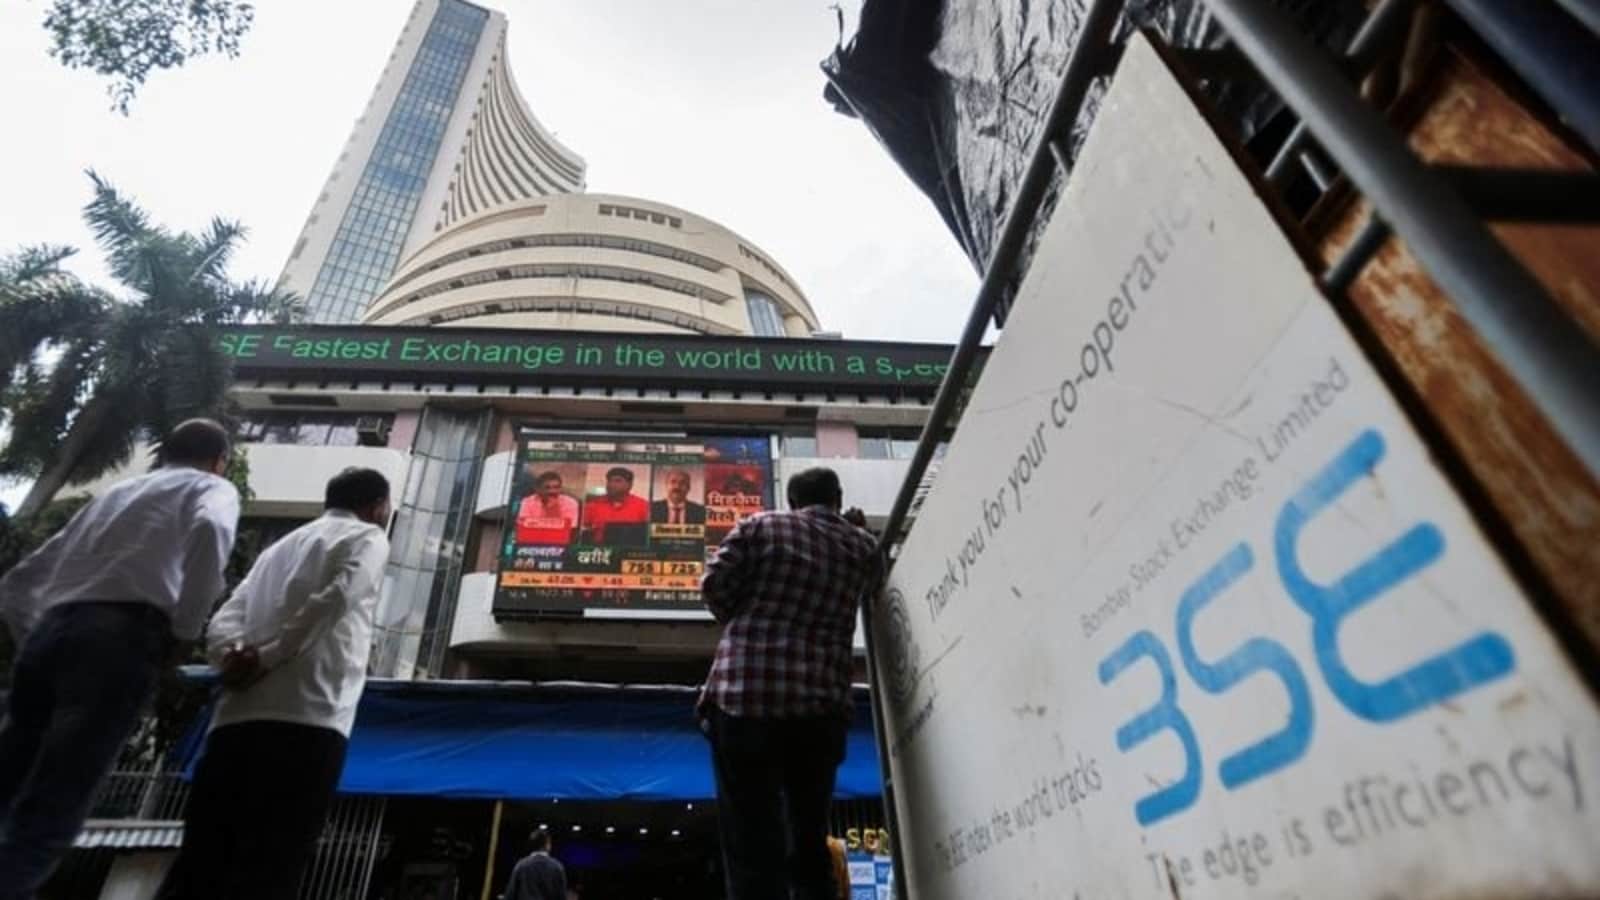 Sensex gains 231 points to close at 57,593, Nifty ends session at 17,222